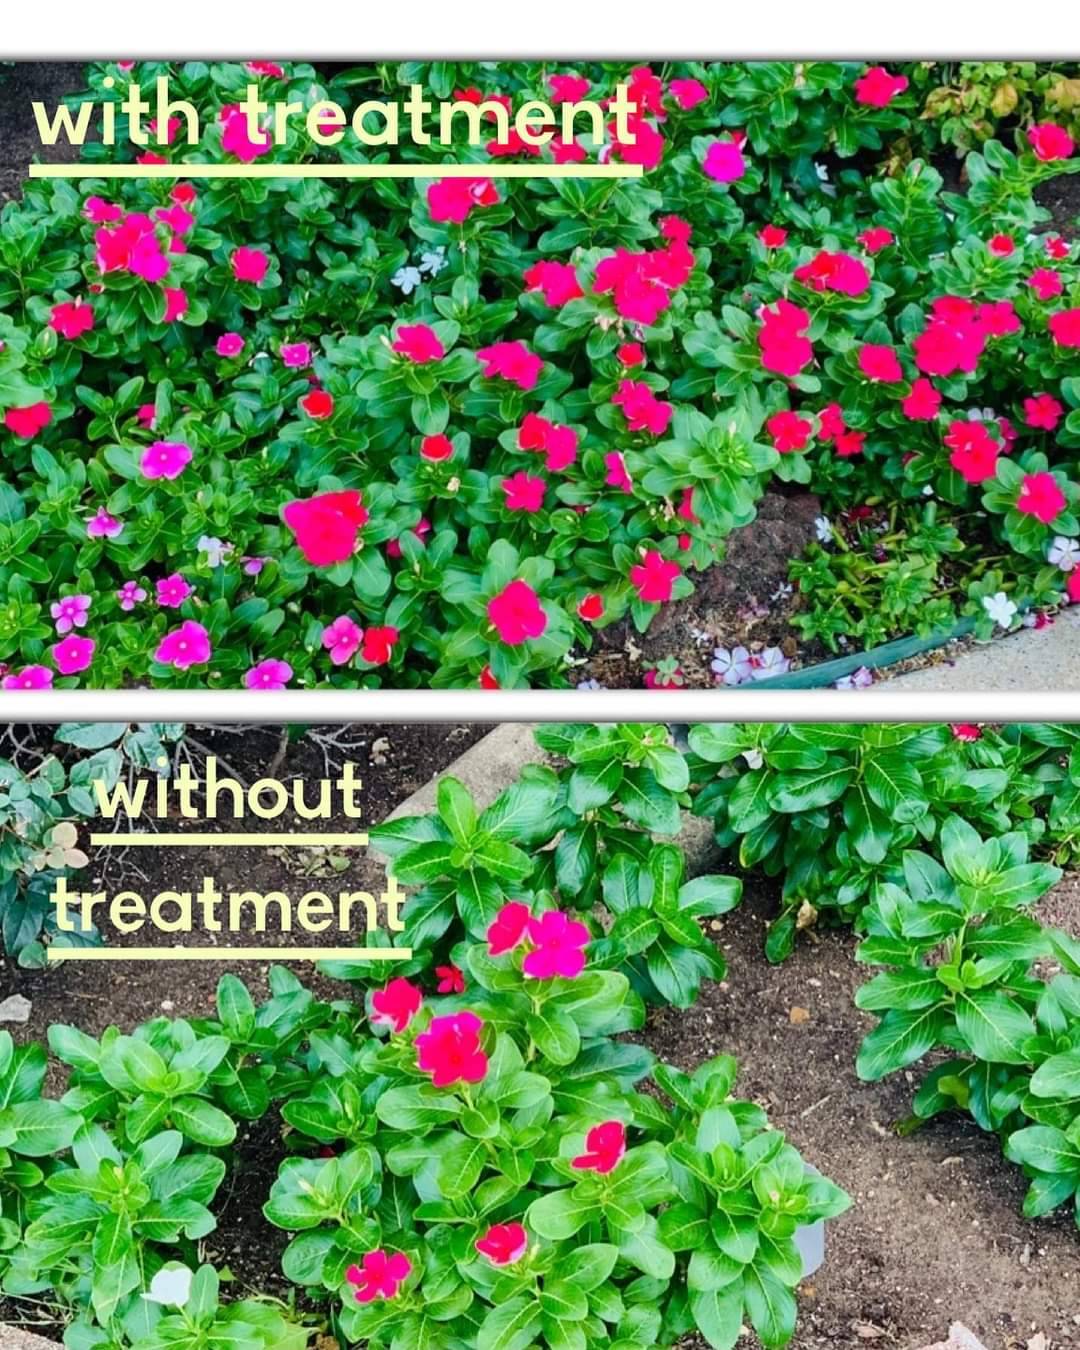 before and after image of treatment on flower bed